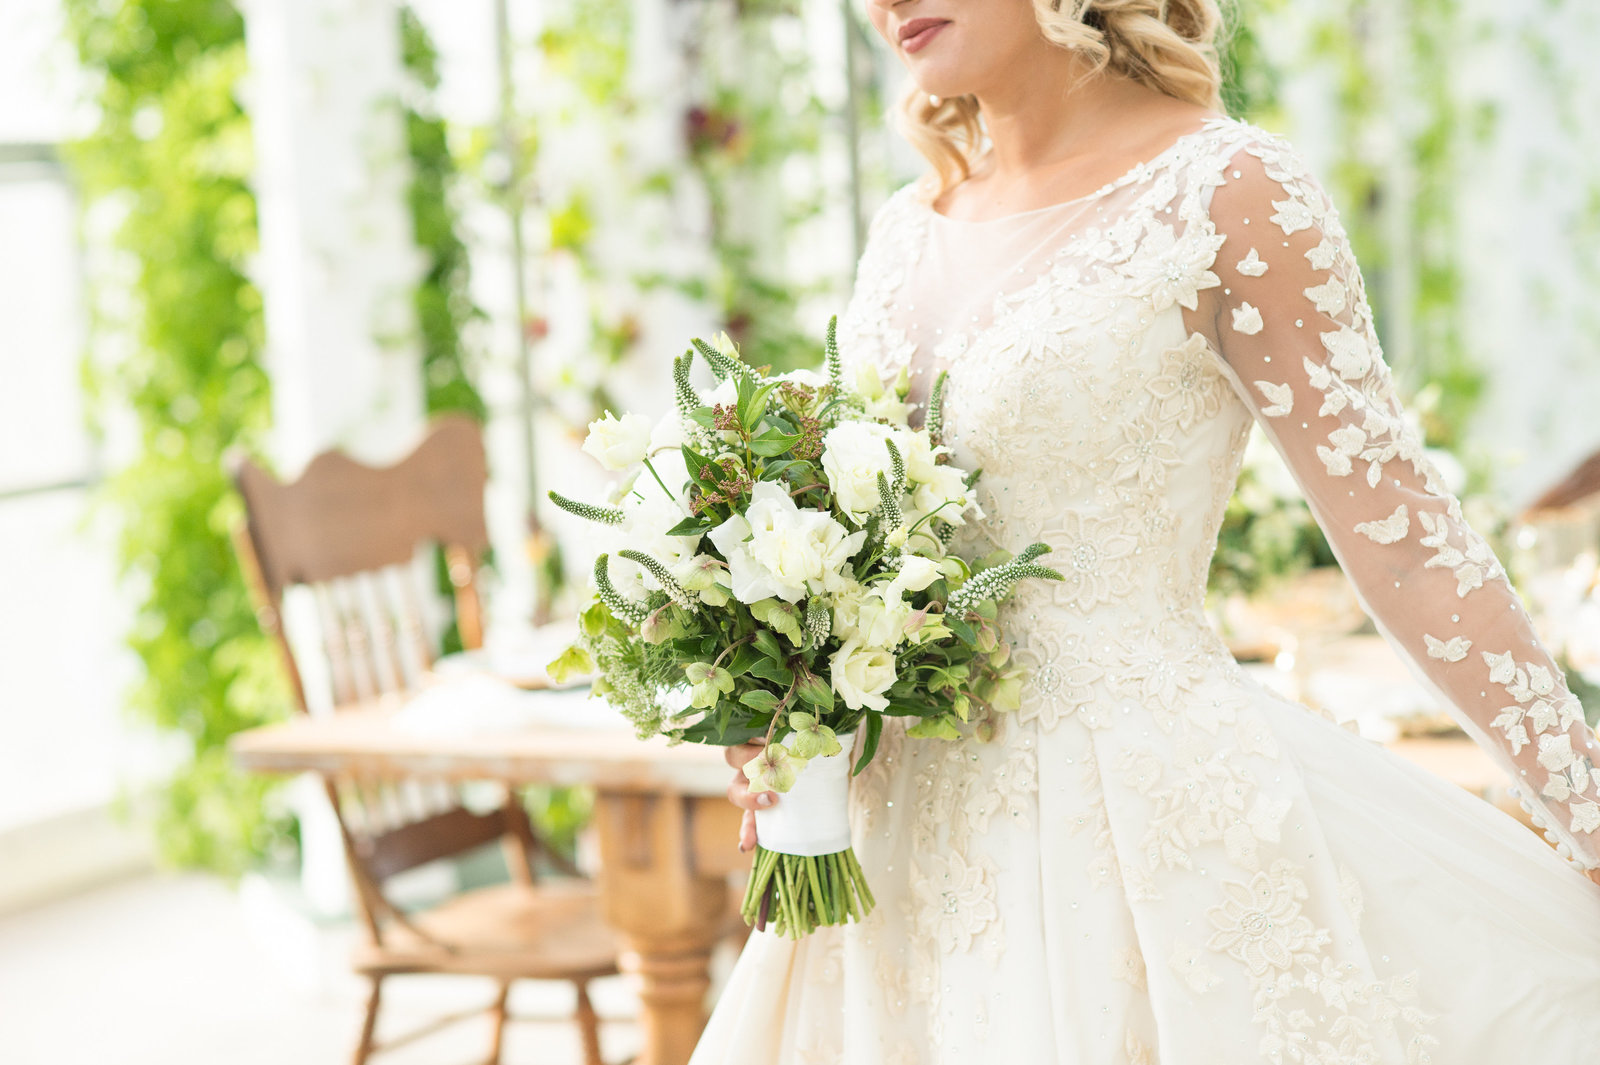 Beautiful bride in room of greenery holding bouquet